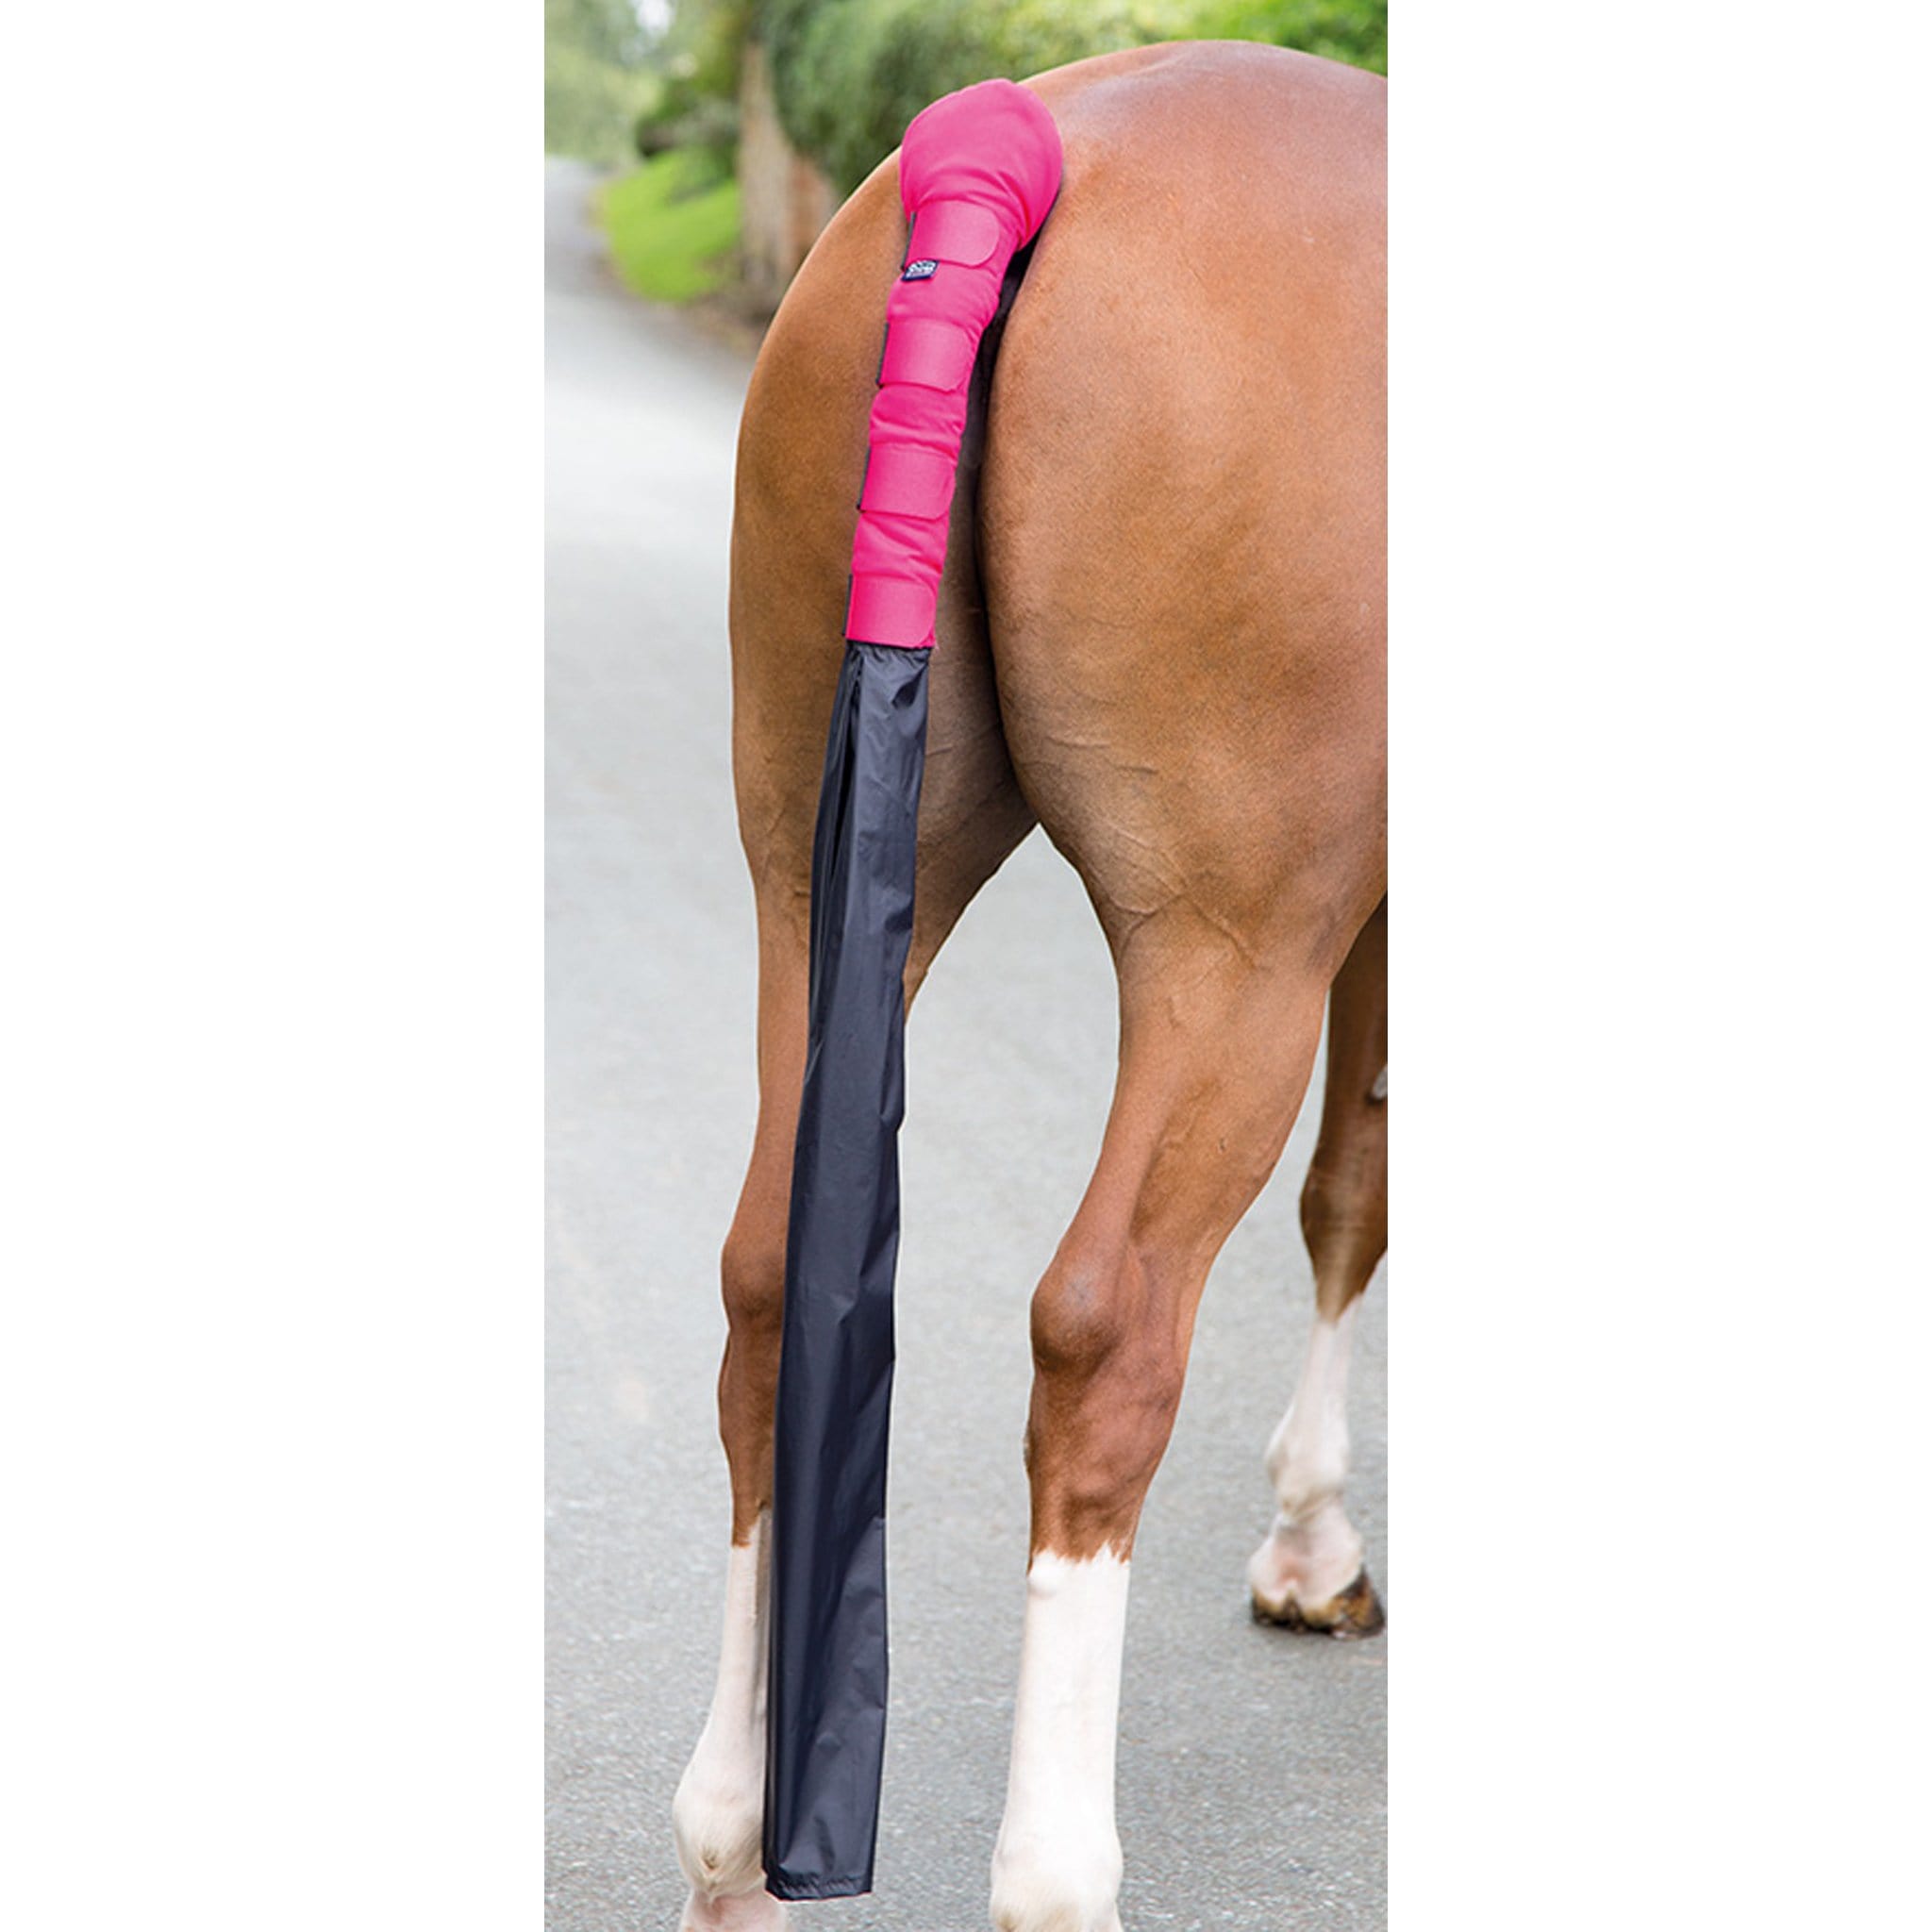 Shires Padded Tail Guard with Bag in Pink